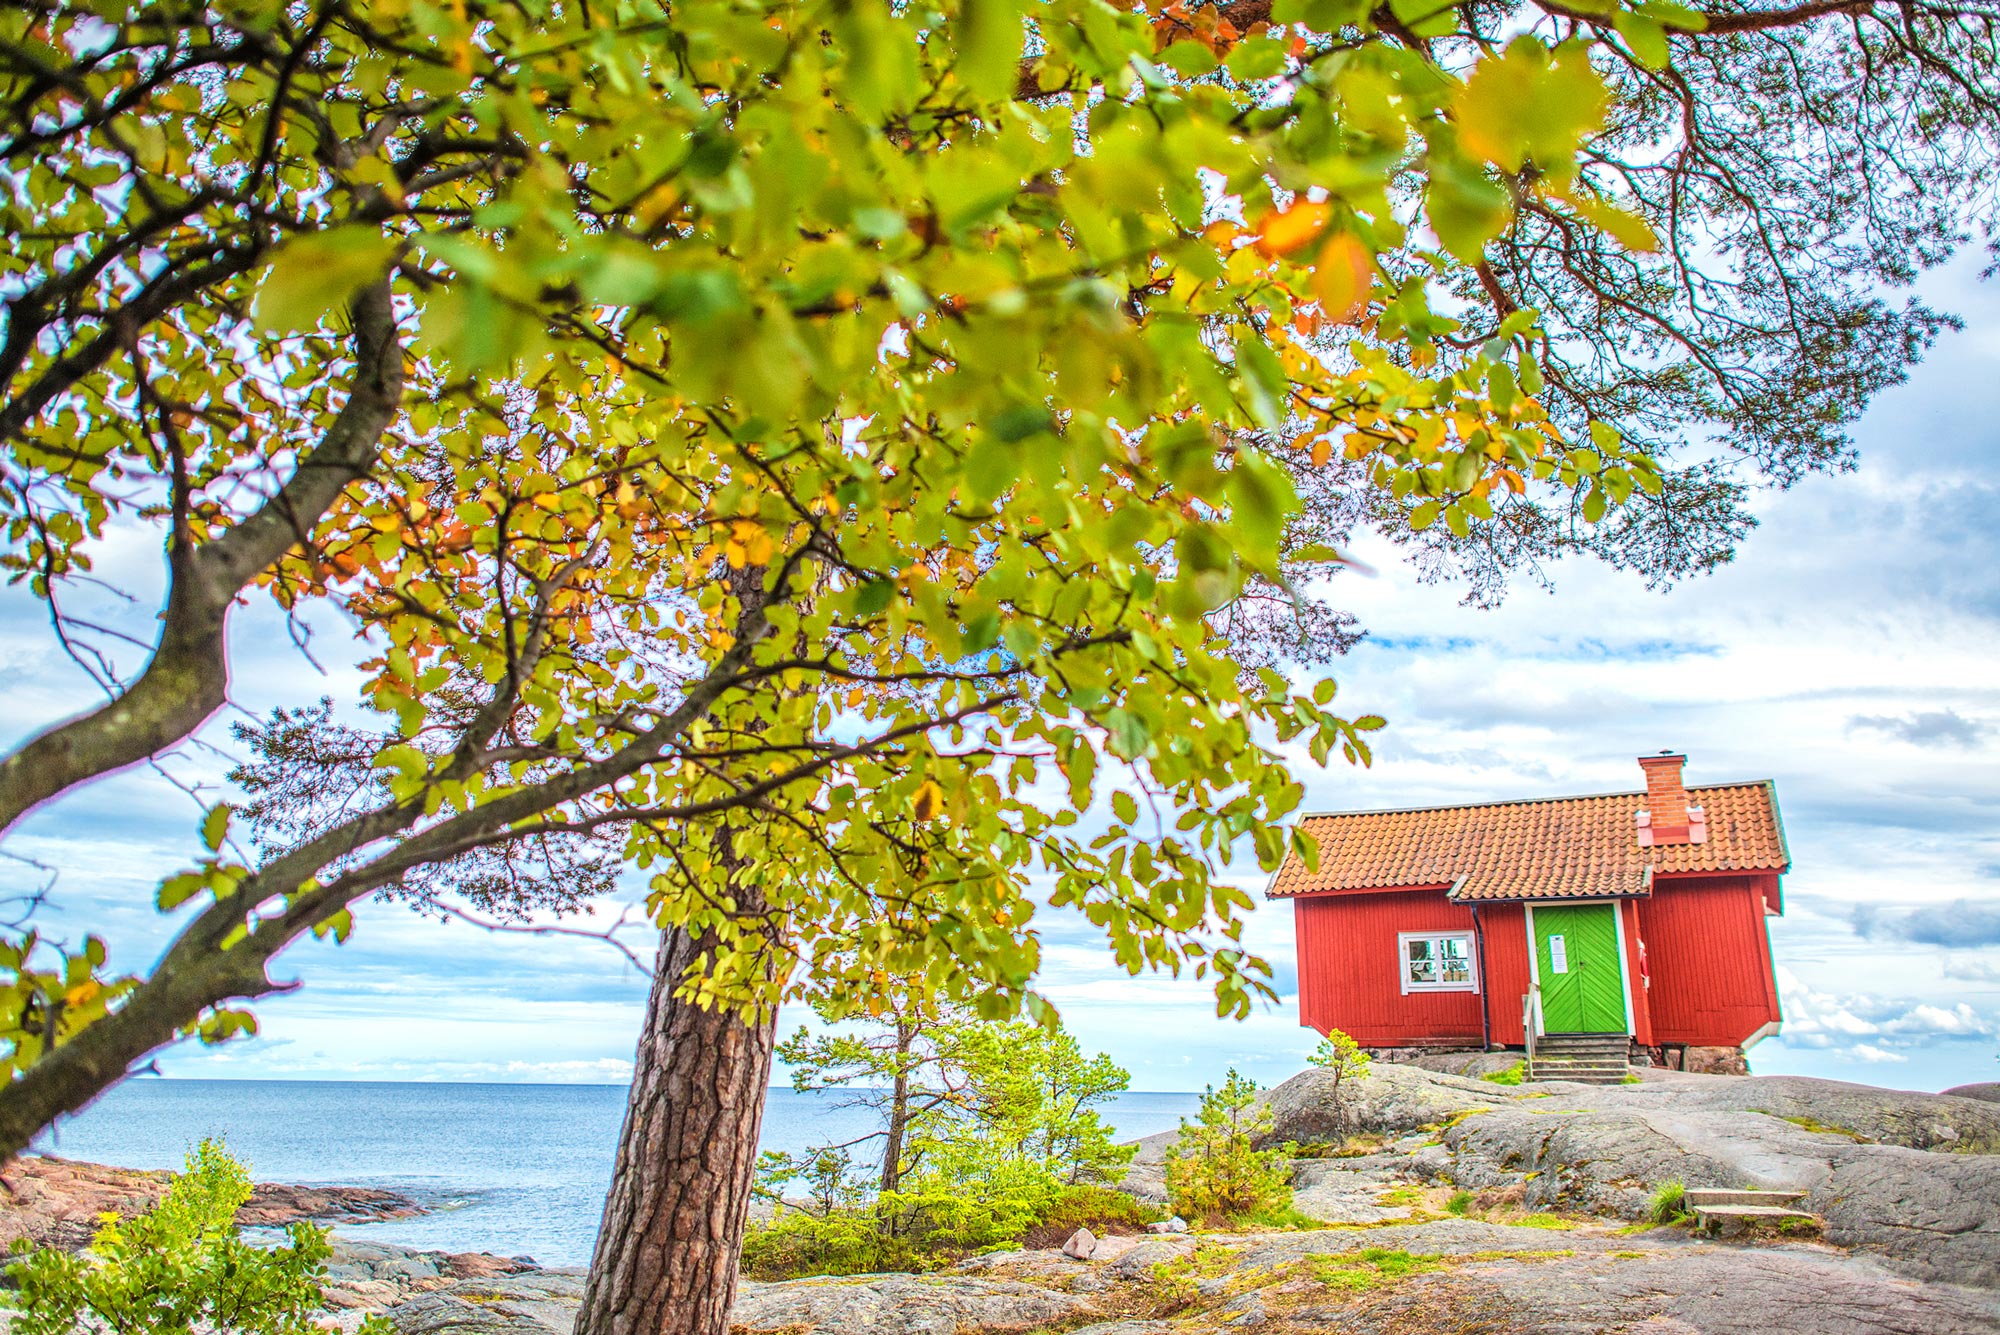 A red house with a green door perched on a cliff overlooking the water